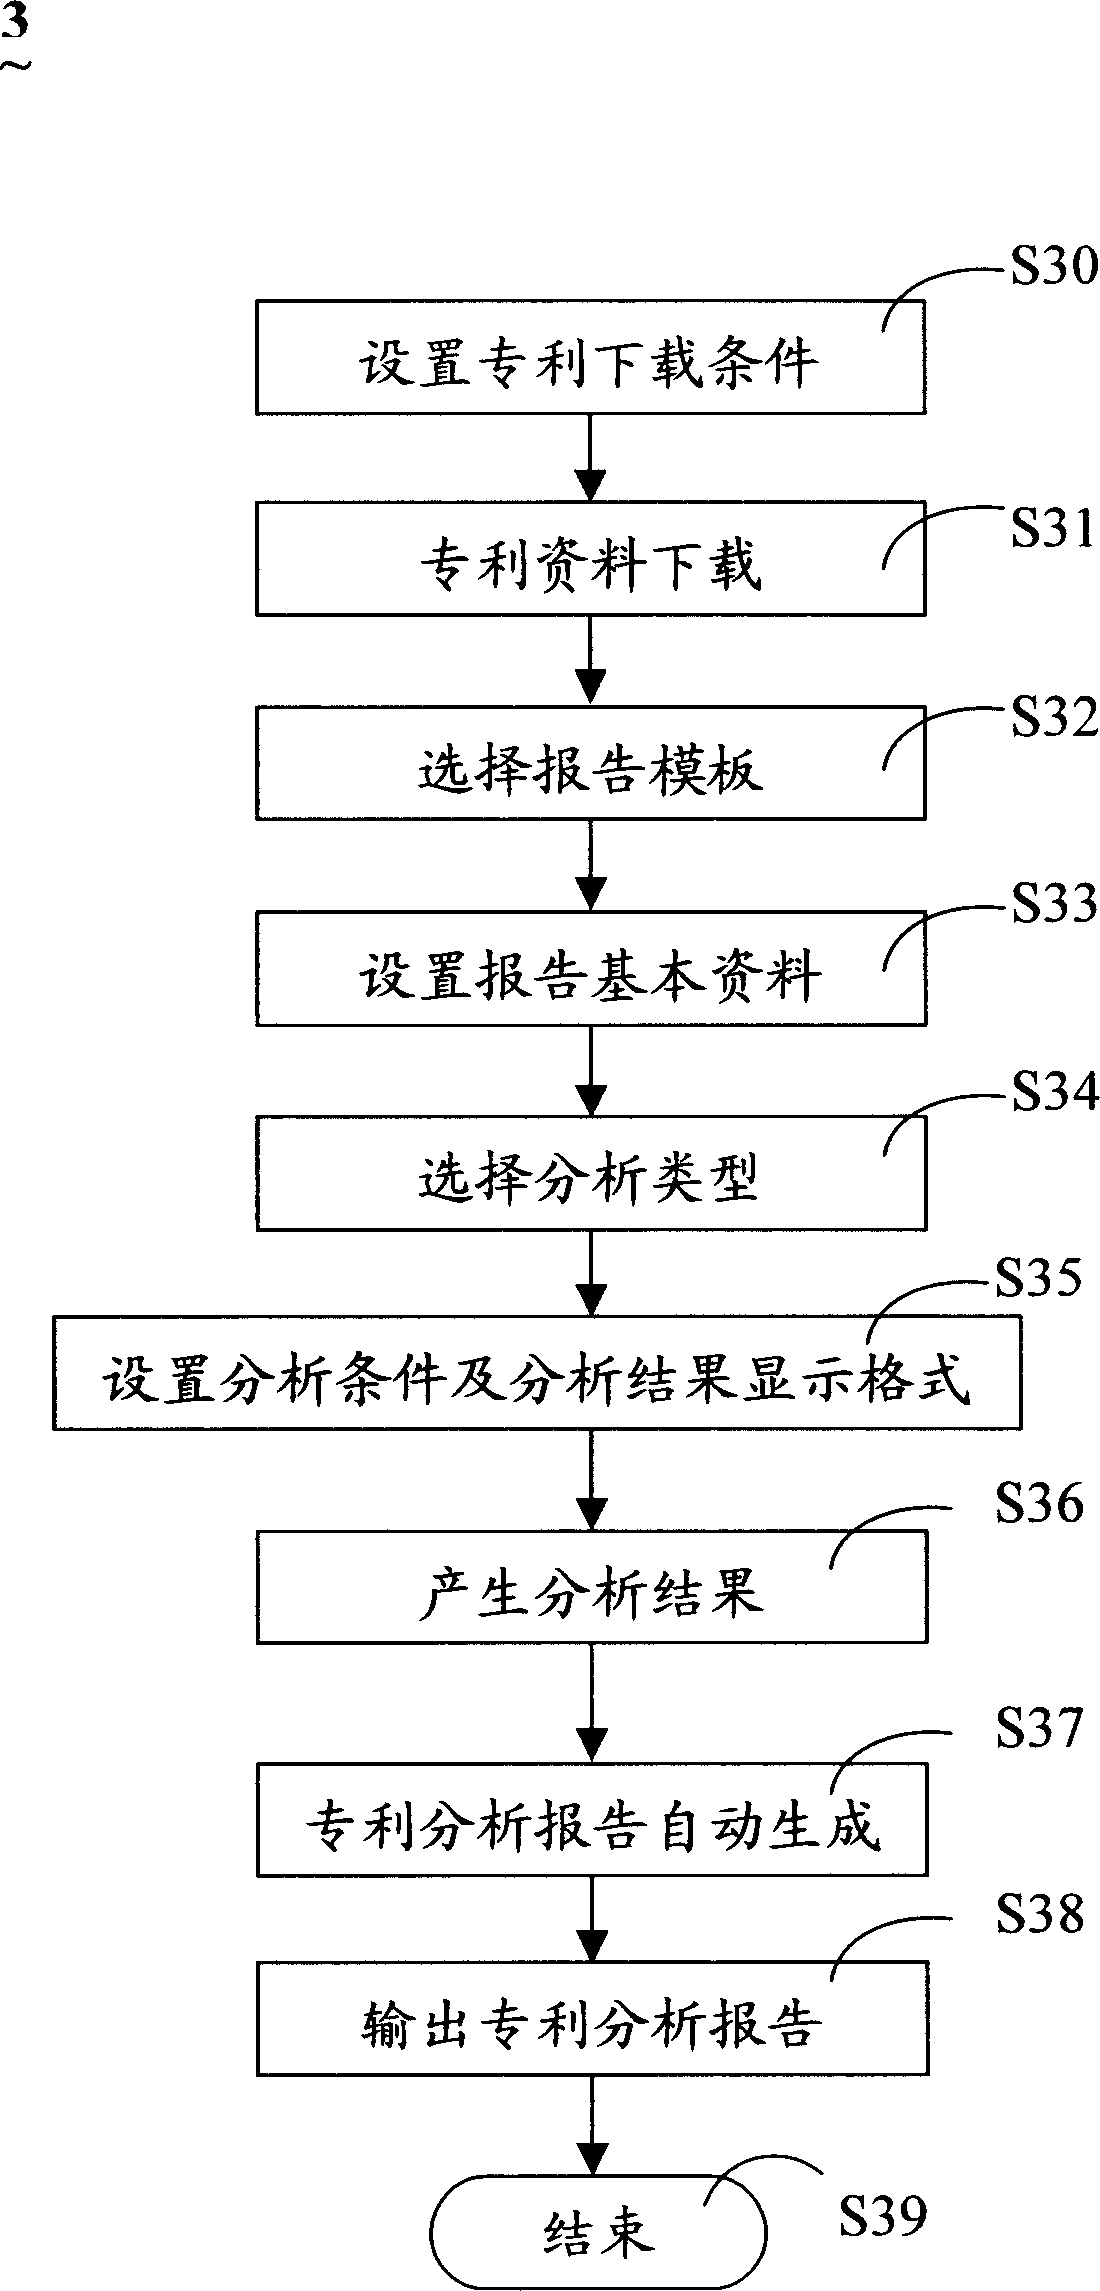 Automatically forming system and method for patent analysis report